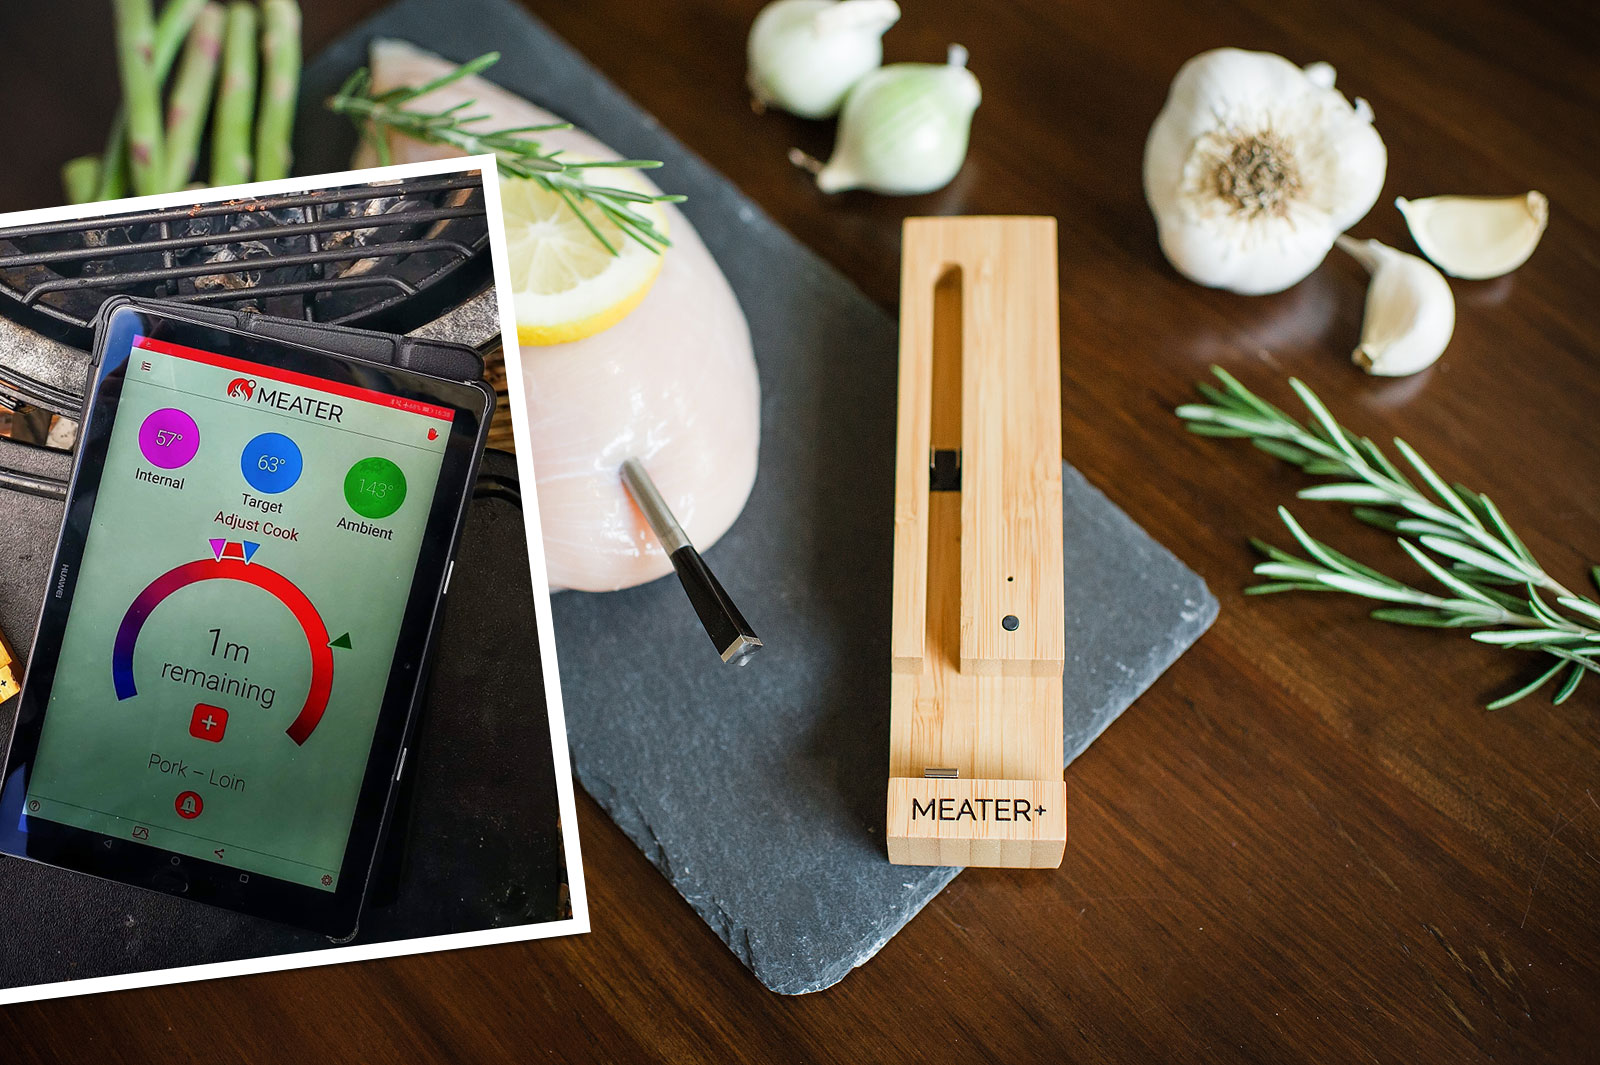 https://www.luxuriousmagazine.com/wp-content/uploads/2020/03/MEATER-Wireless-Smart-Thermometer-with-chicken.jpg